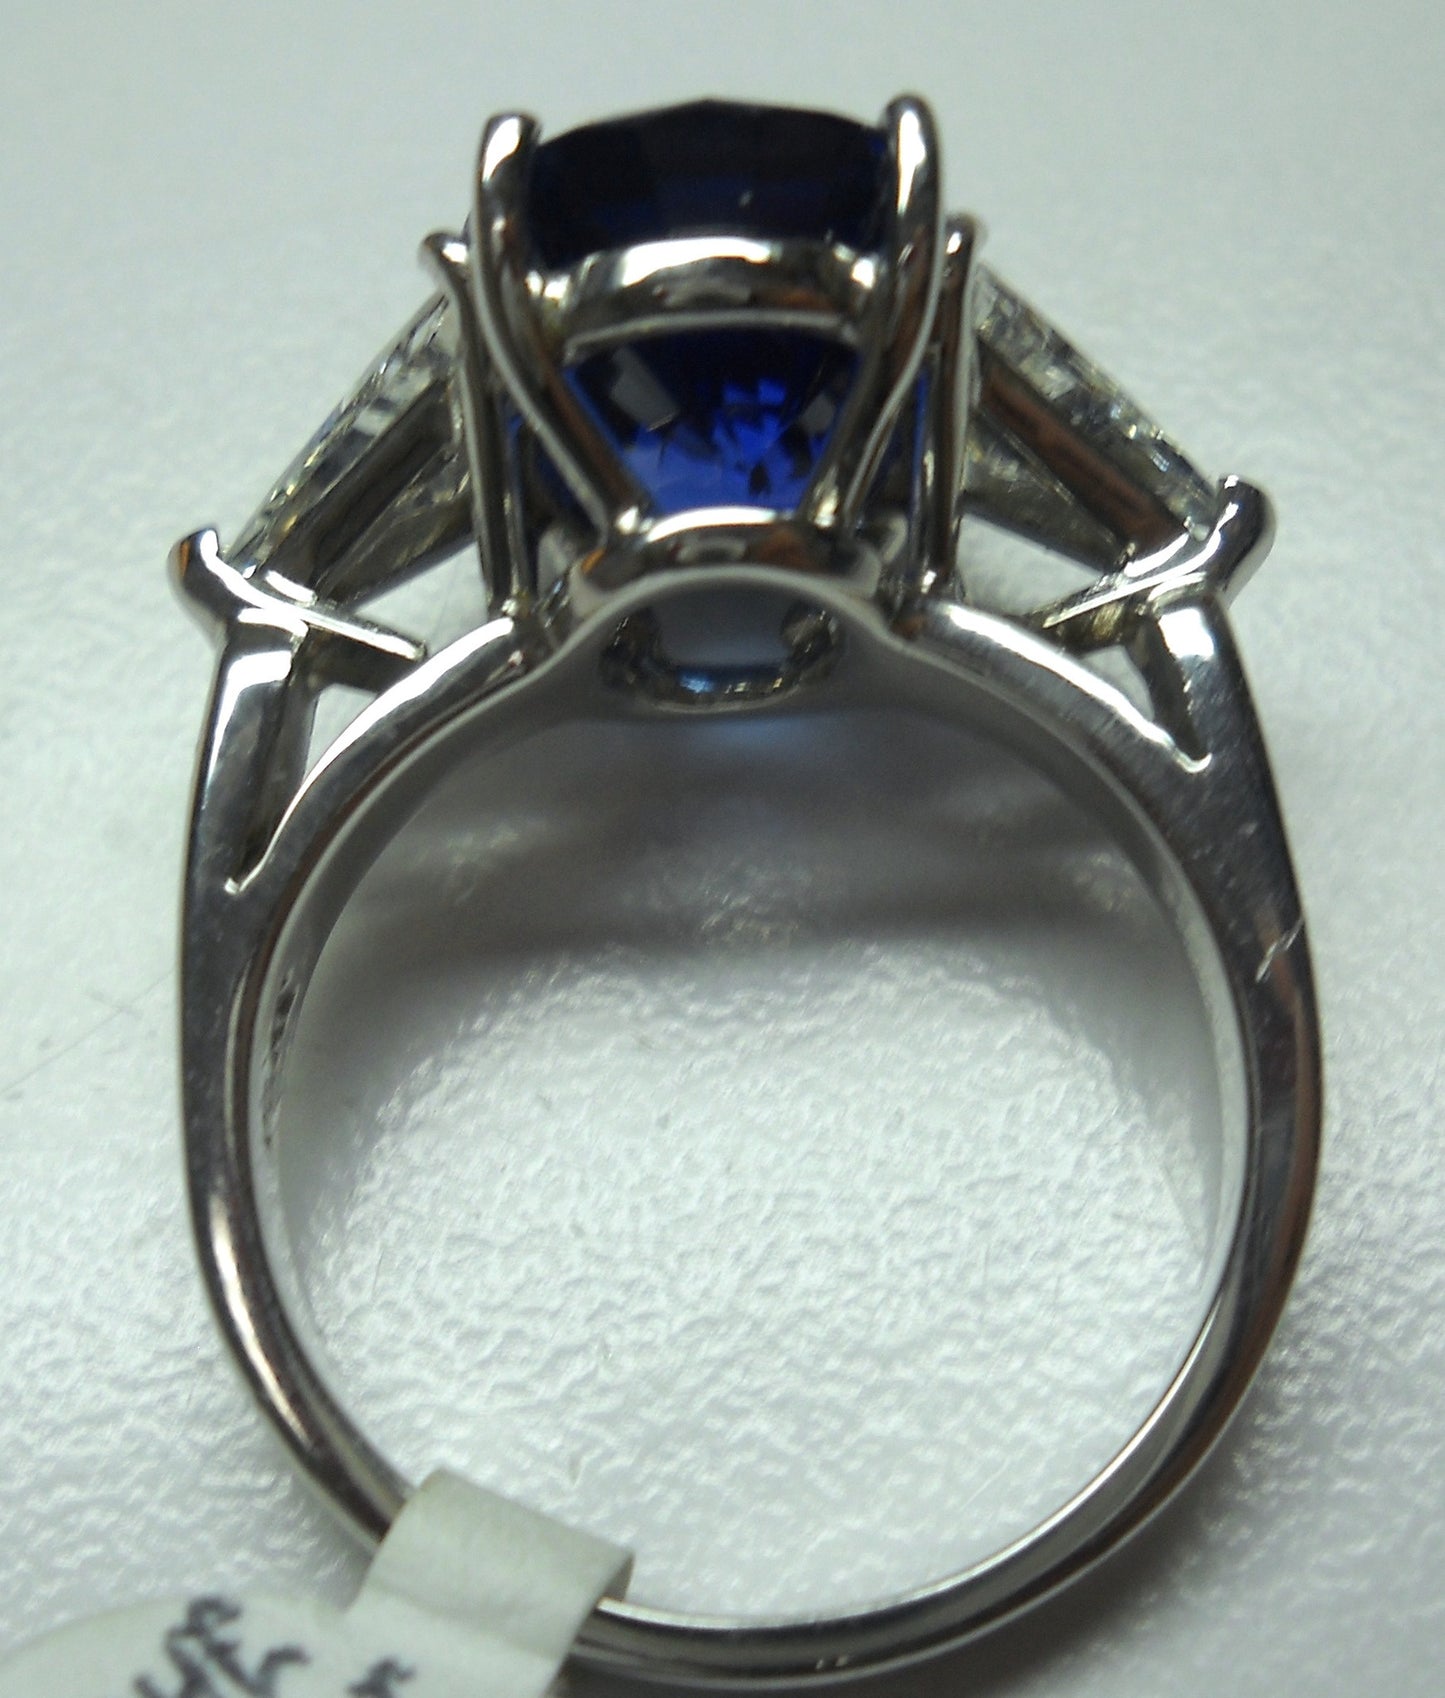 3.64ct Sapphire Diamond Engagement Ring 18kt White Gold JEWELFORME BLUEE